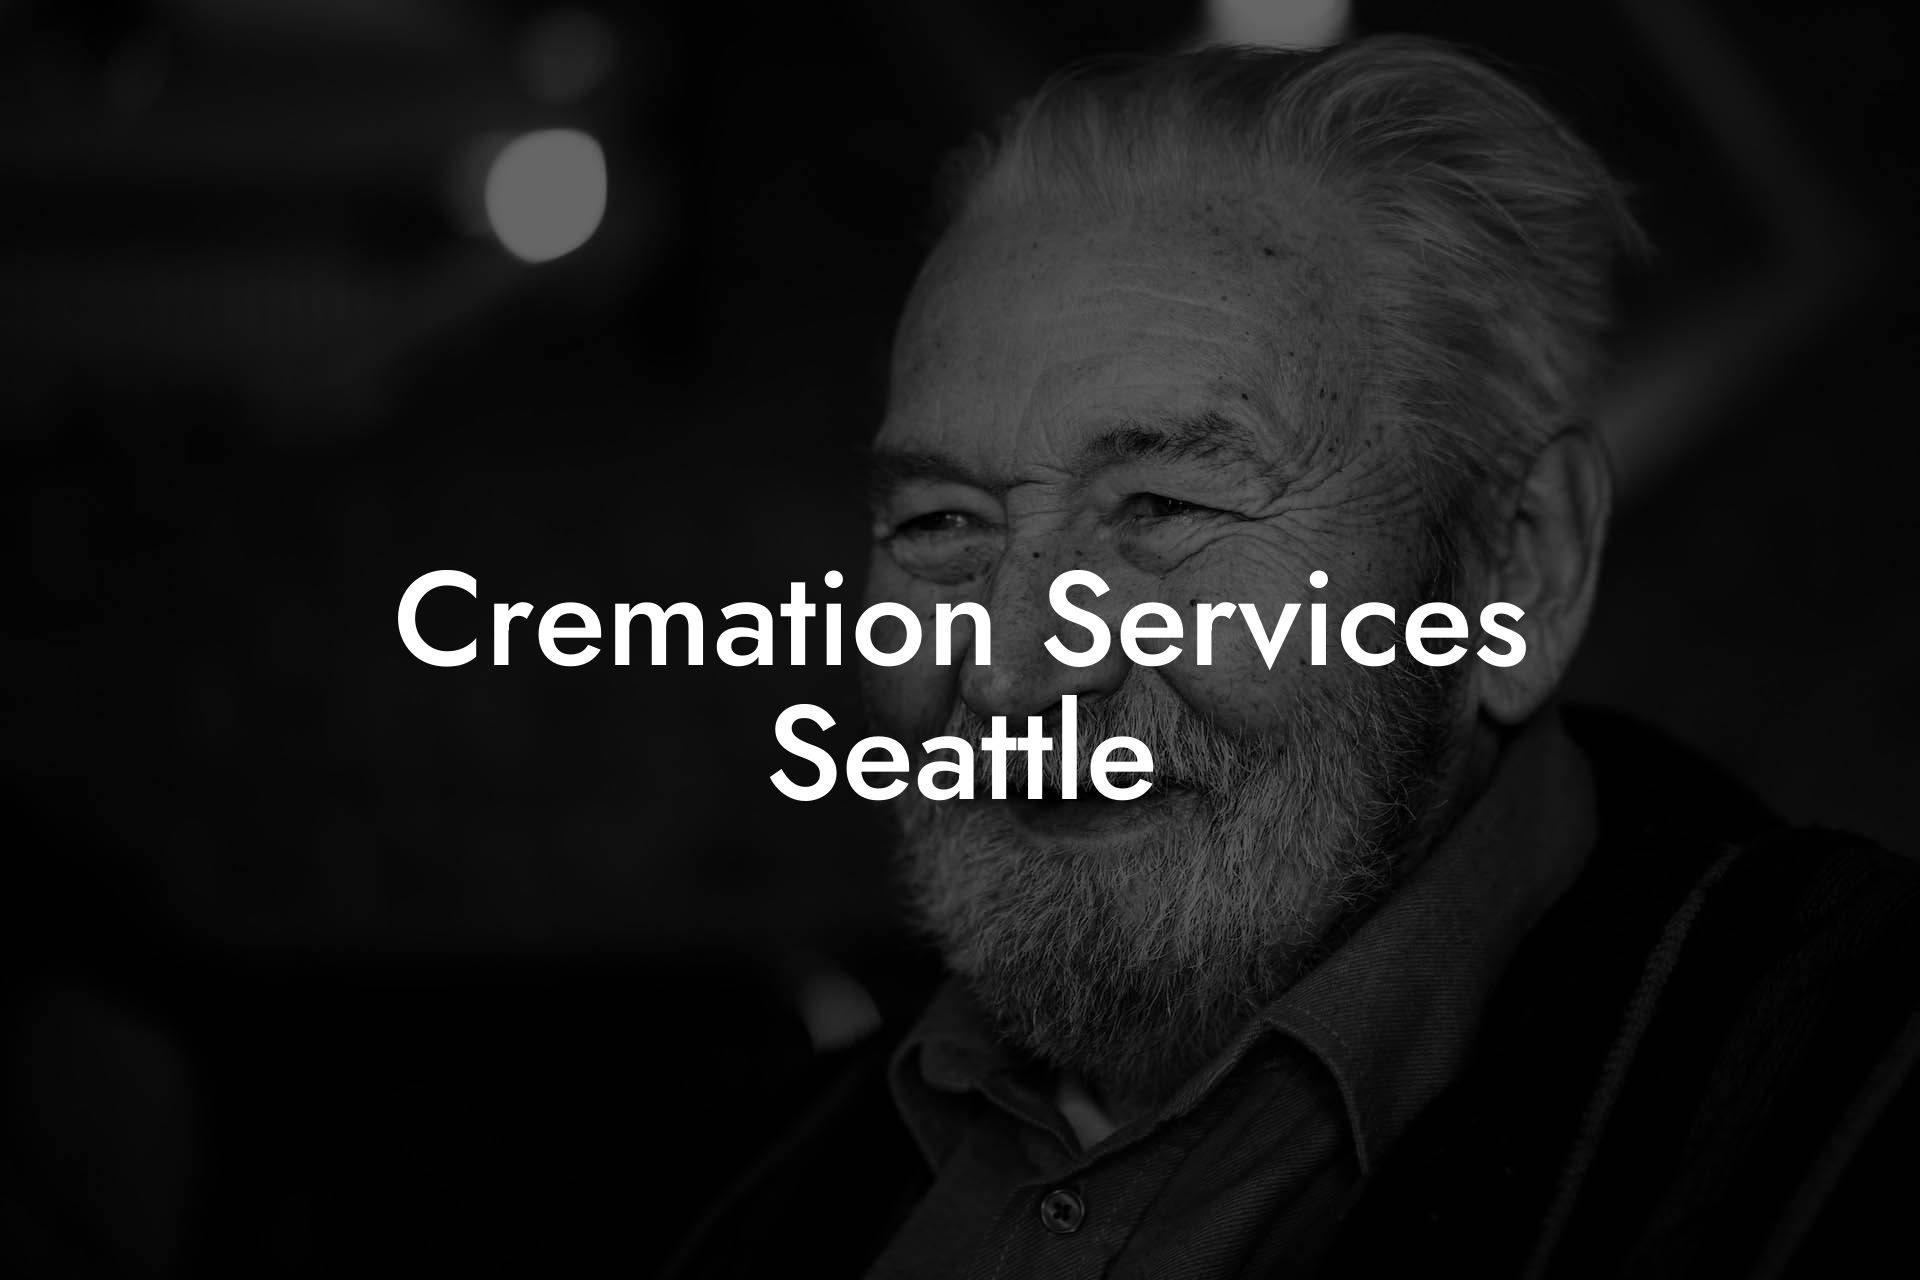 Cremation Services Seattle